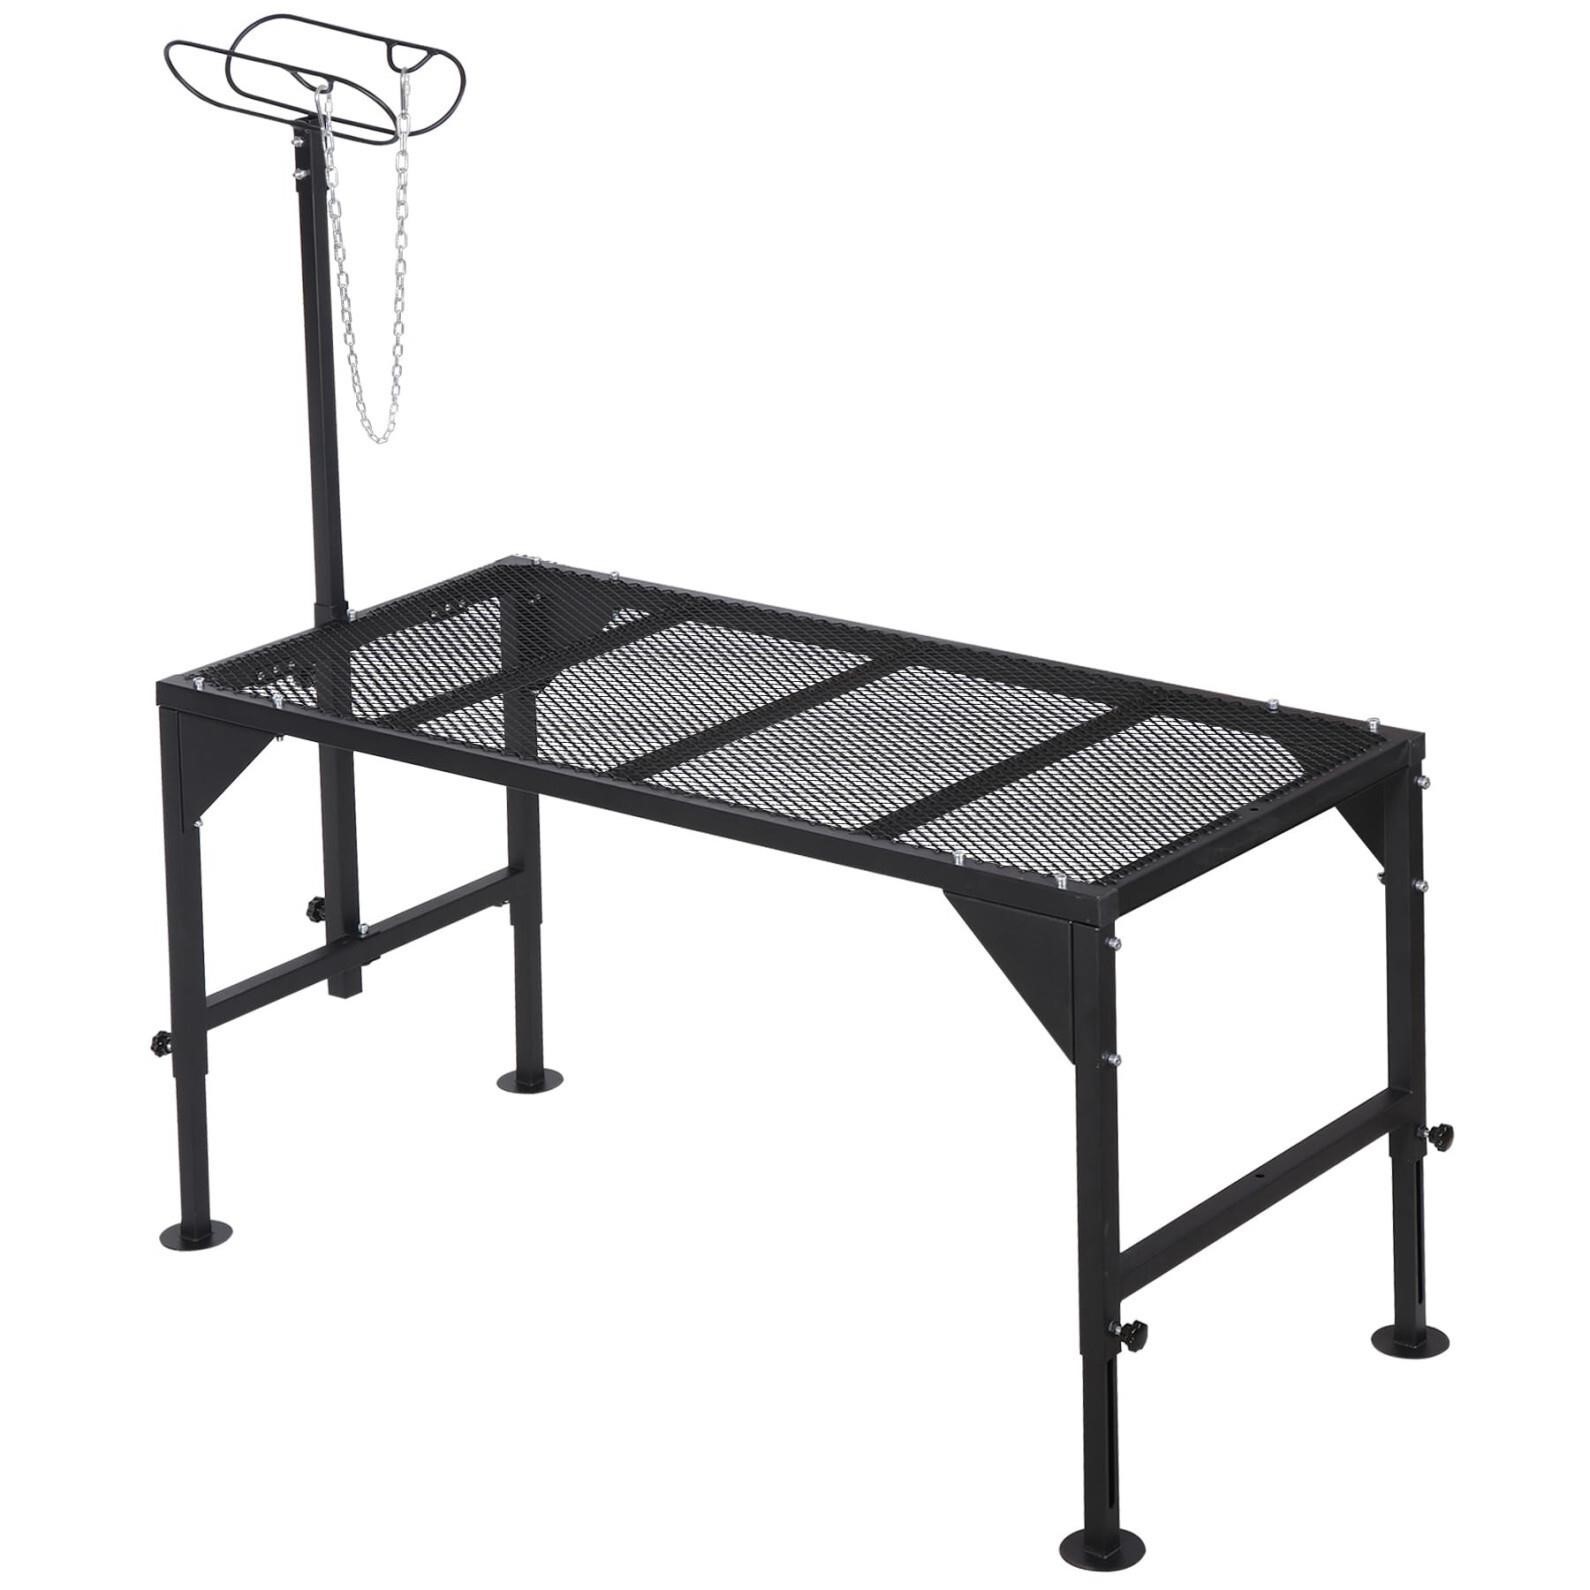 Oxphanor Metal Livestock Stand, Adjustable Height